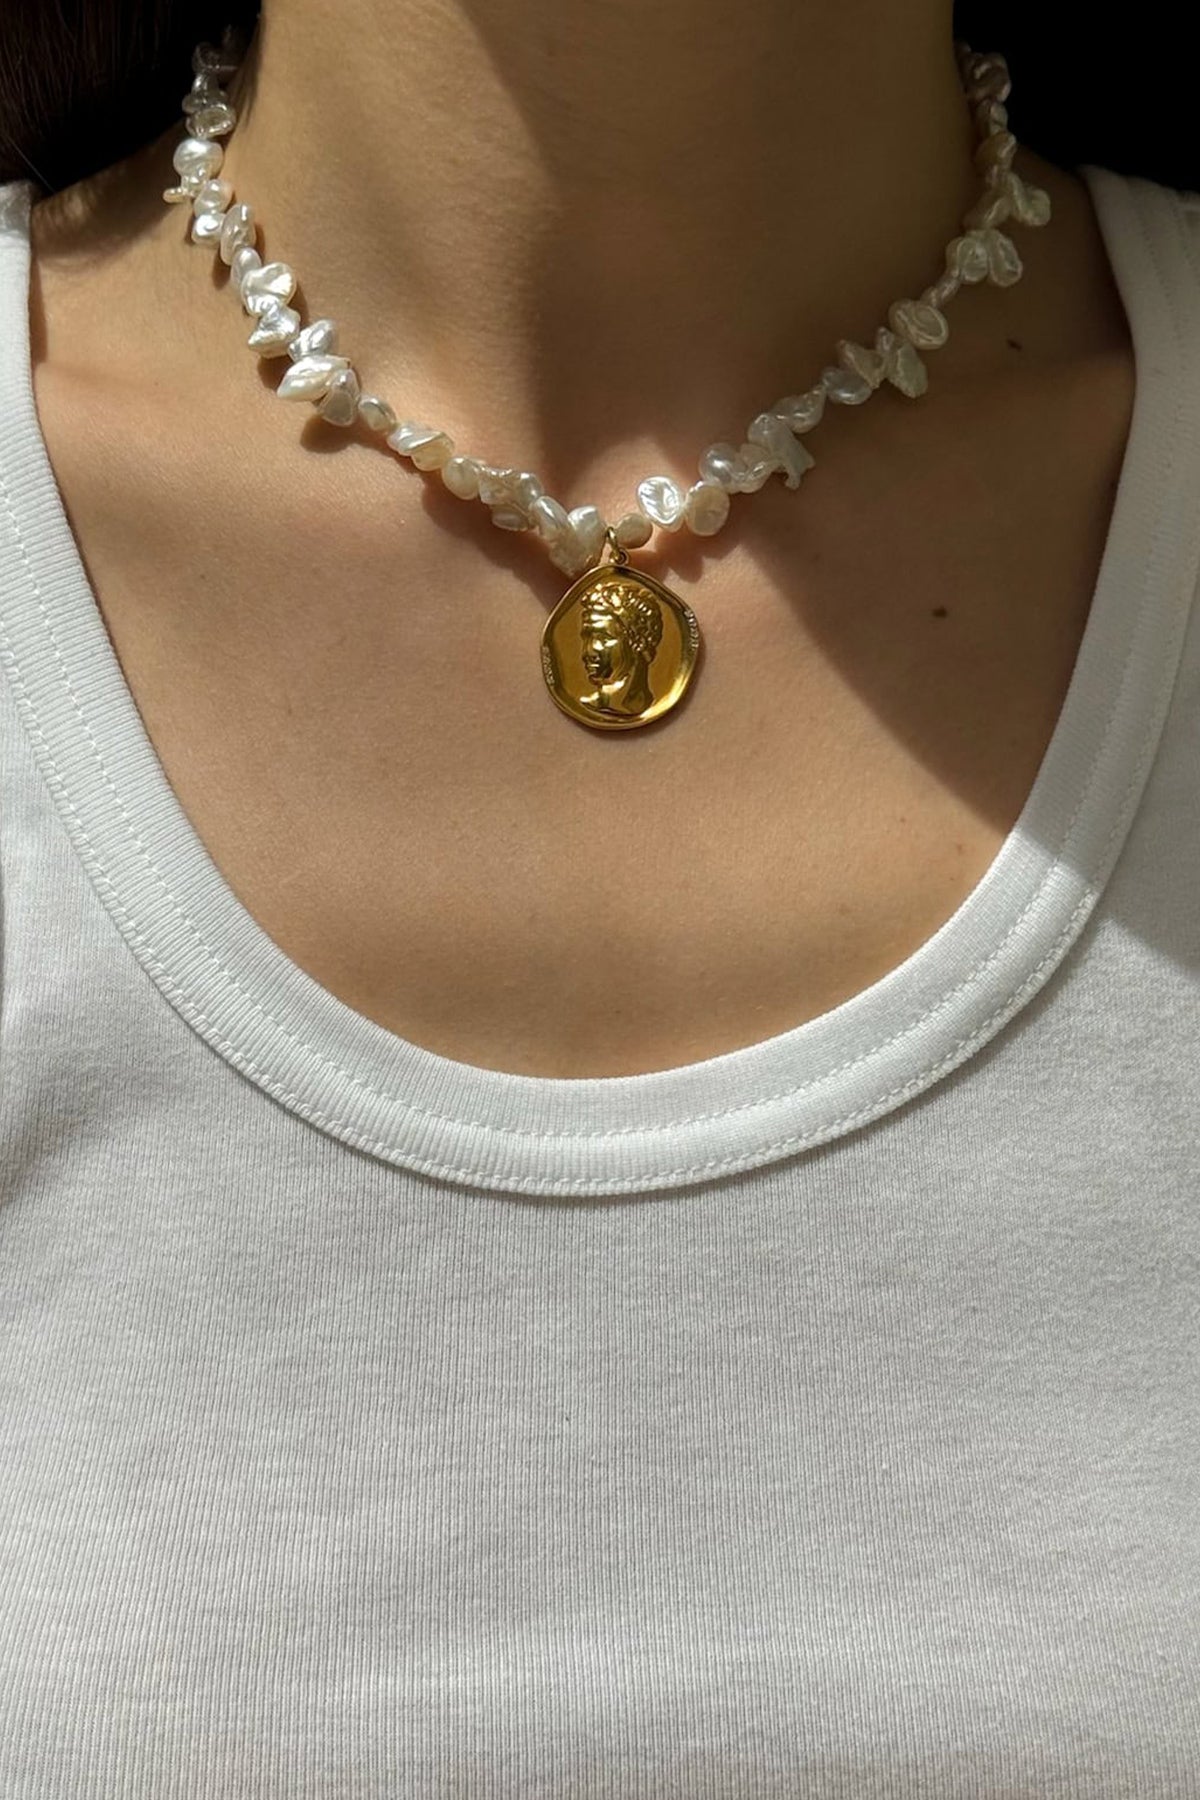 STATEMENT PEARL NECKLACE "HERMIS" WHITE/GOLD